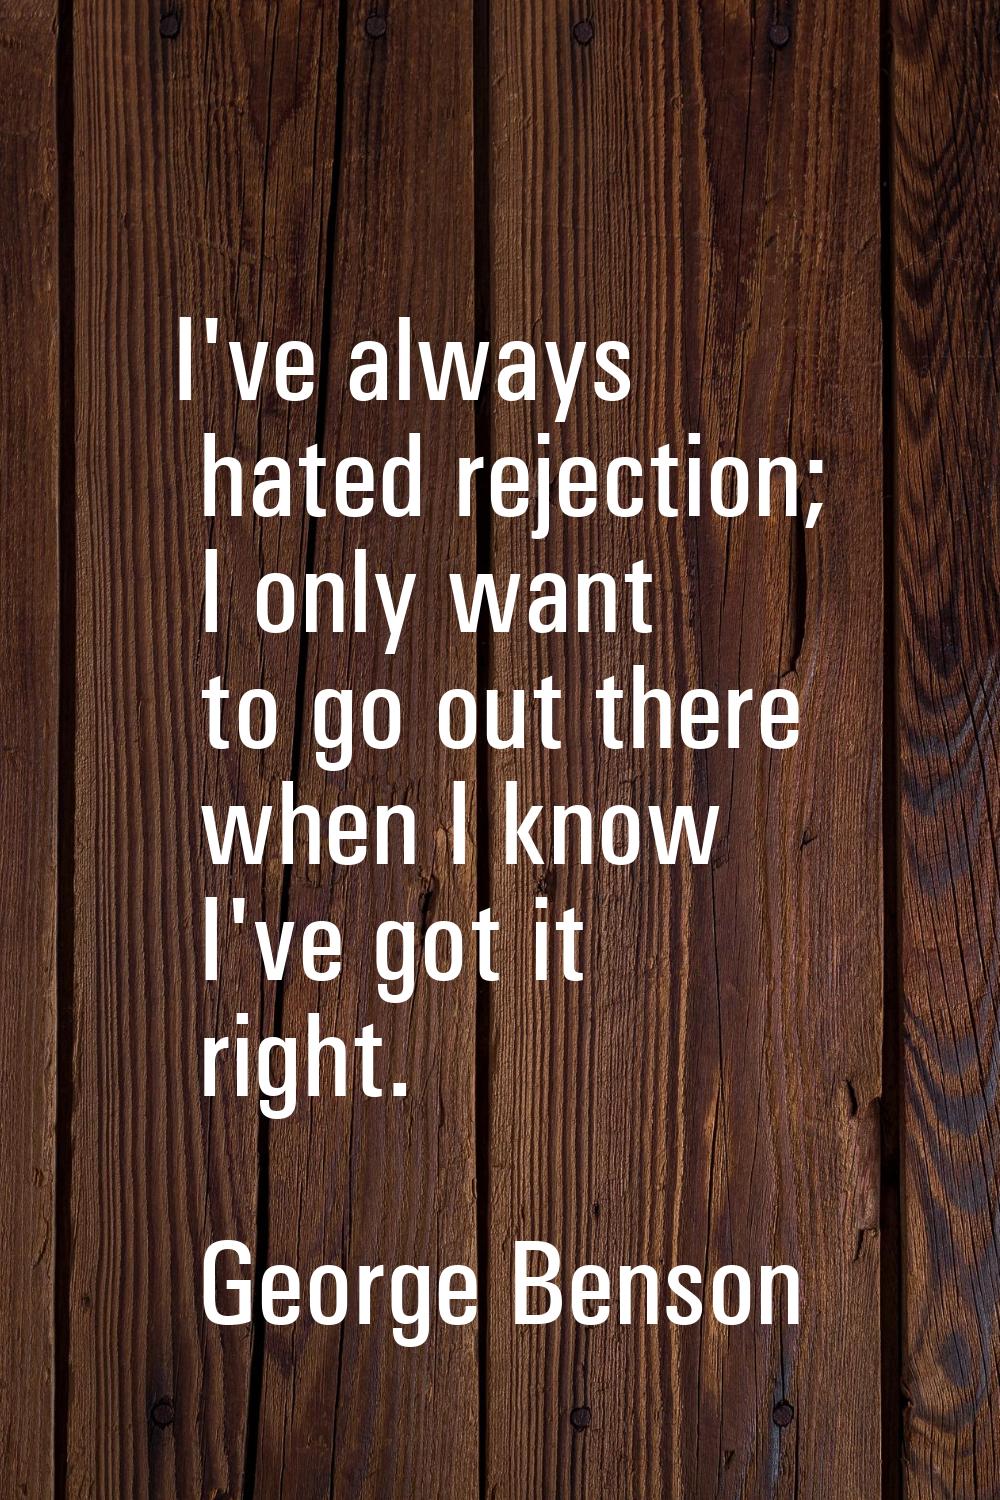 I've always hated rejection; I only want to go out there when I know I've got it right.